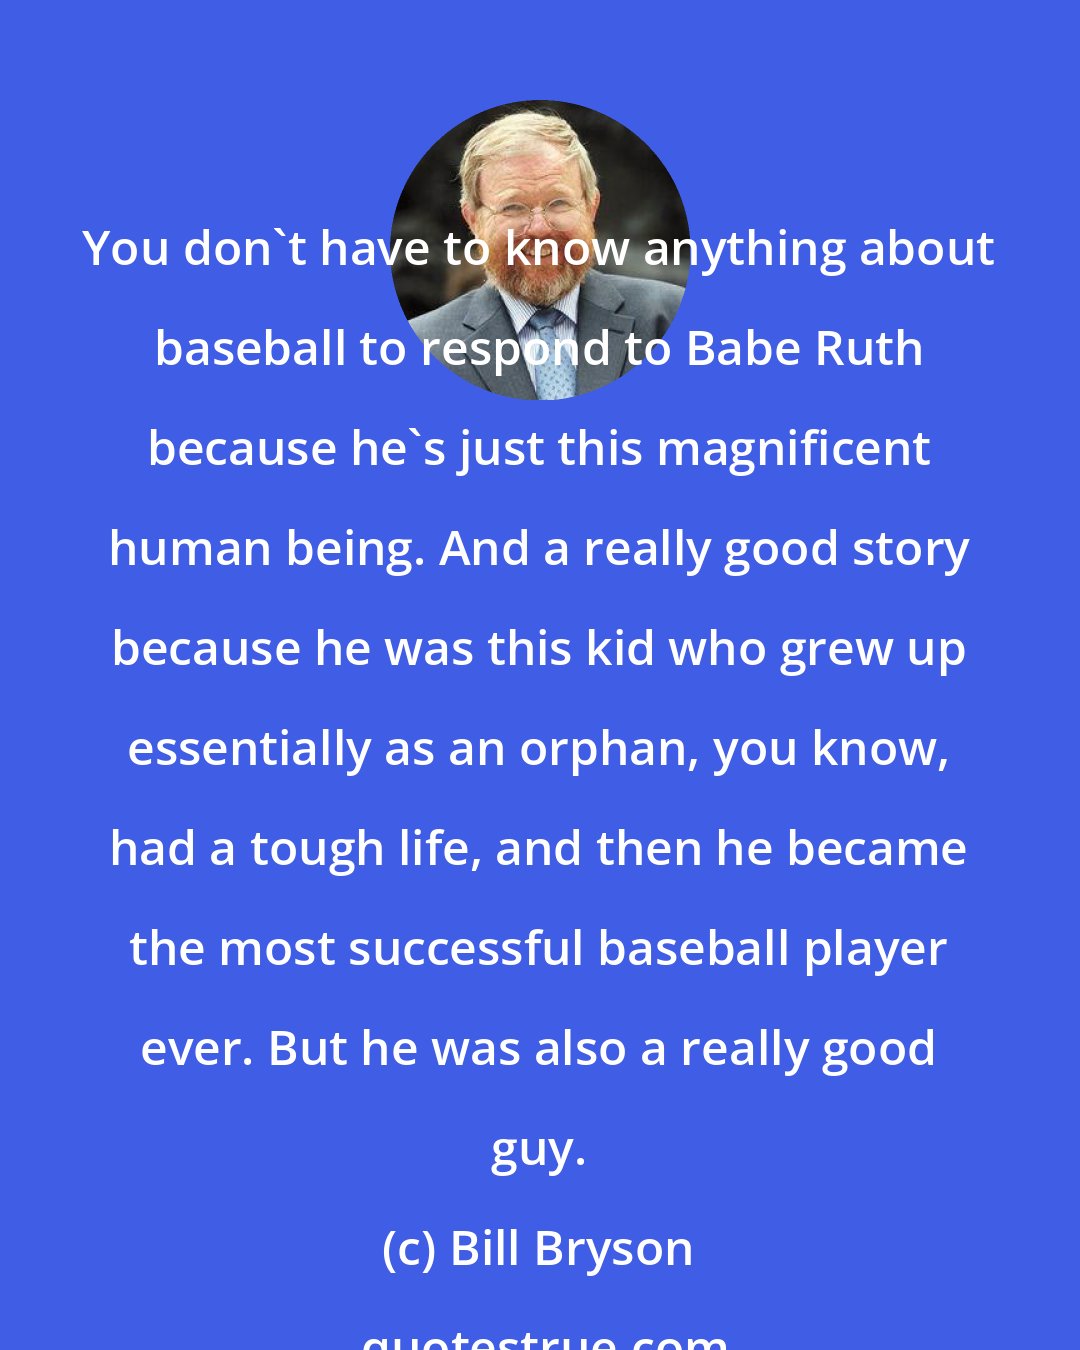 Bill Bryson: You don't have to know anything about baseball to respond to Babe Ruth because he's just this magnificent human being. And a really good story because he was this kid who grew up essentially as an orphan, you know, had a tough life, and then he became the most successful baseball player ever. But he was also a really good guy.